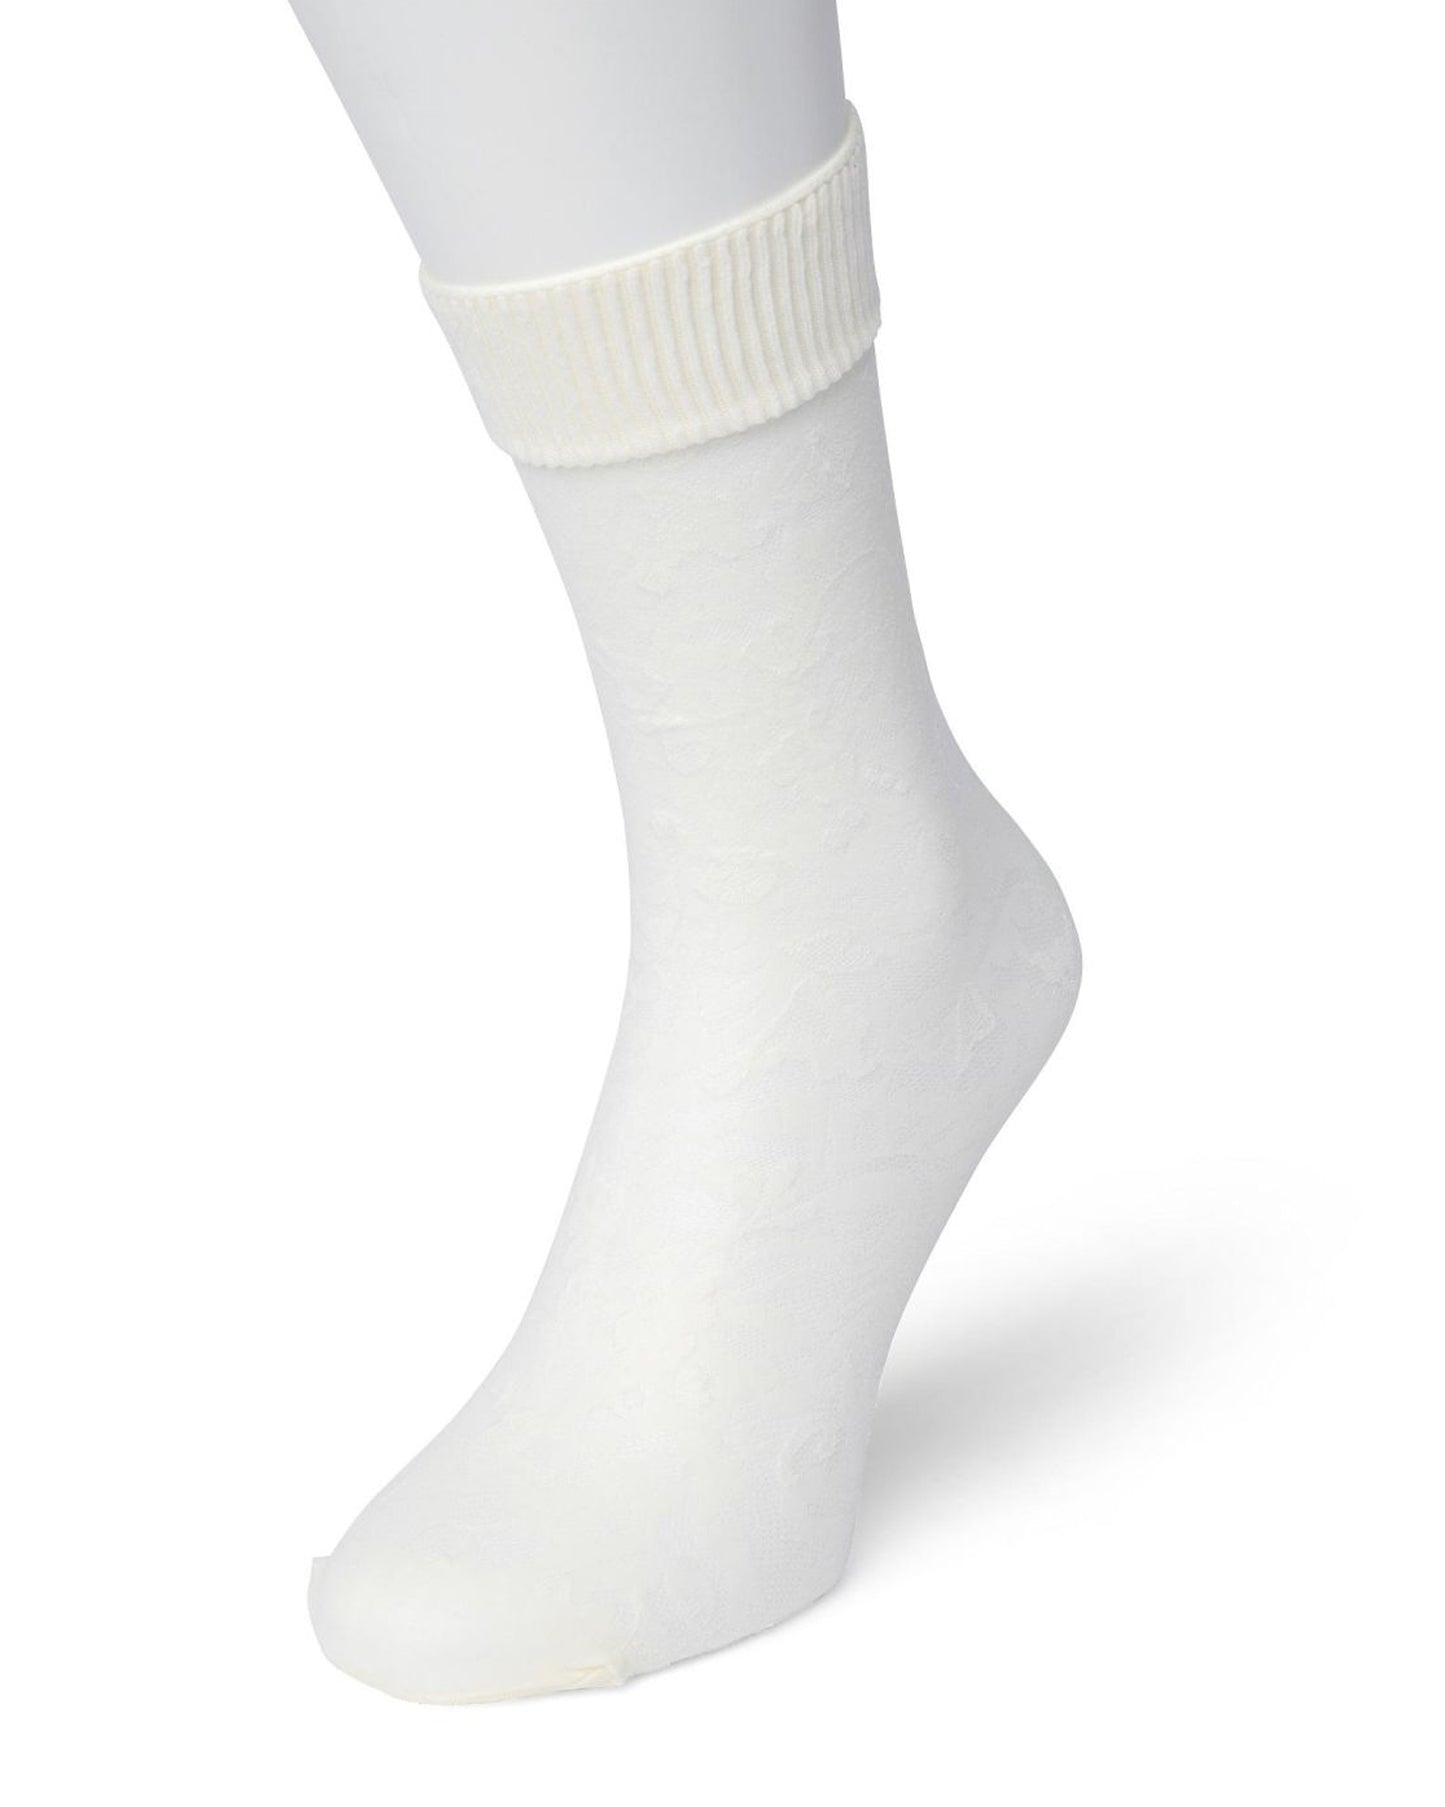 Bonnie Doon Floral Lace Socks - Off white semi-opaque floral lace style pattern fashion ankle socks with a soft ribbed deep elasticated comfort cuff and reinforced toe.